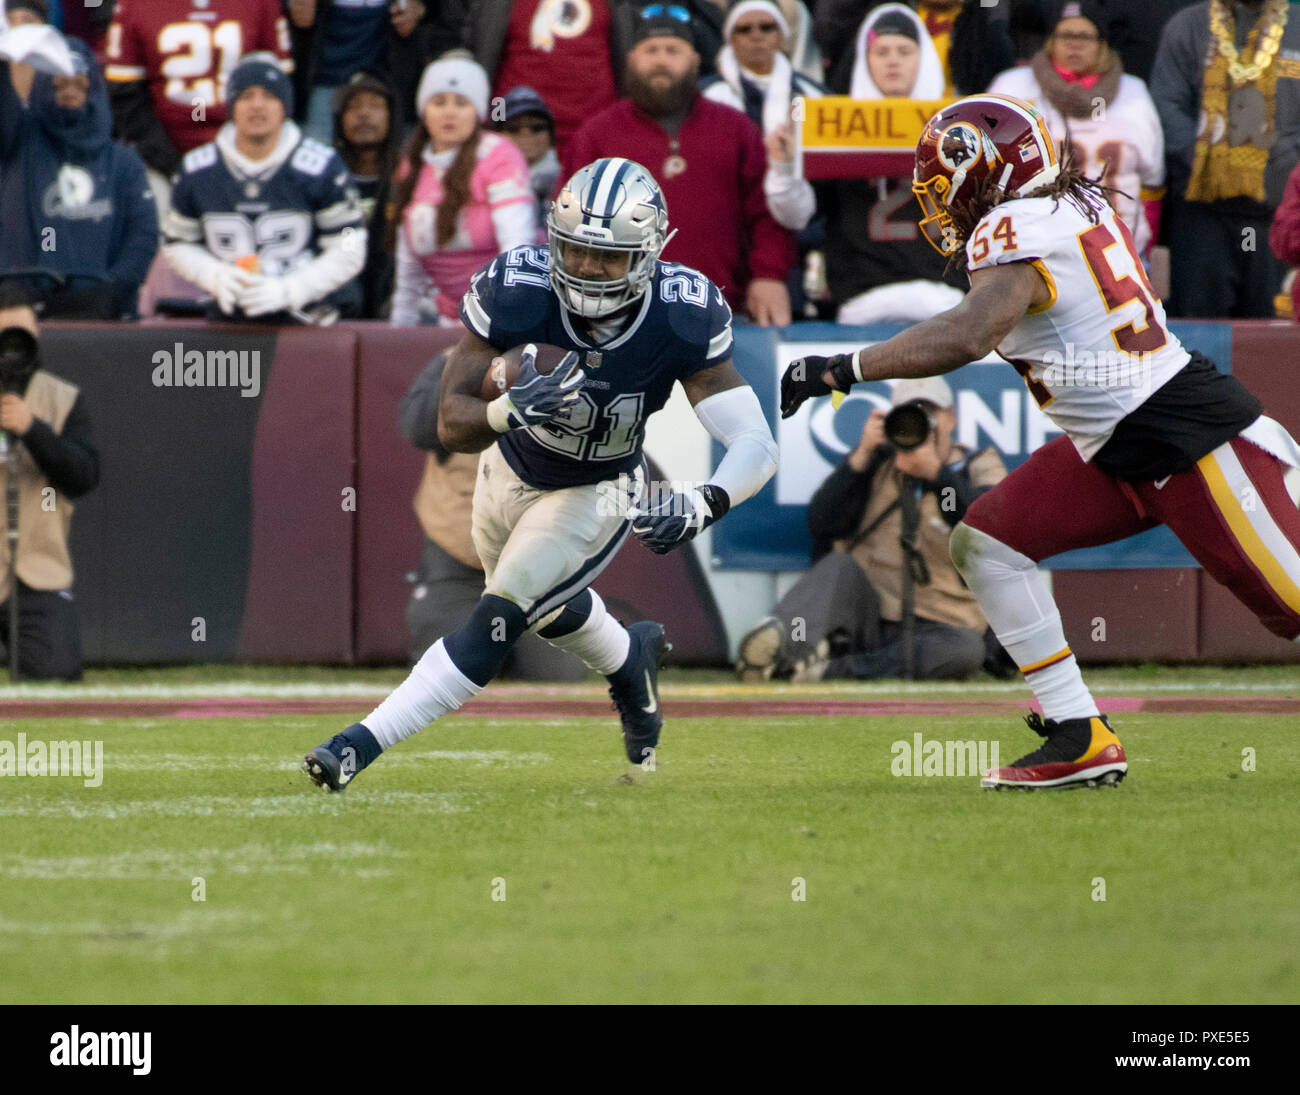 The Play. 21st Oct, 2018. Dallas Cowboys running back Ezekiel Elliott (21) carries the ball in the second quarter against the Washington Redskins at FedEx Field in Landover, Maryland on Sunday, October 21, 2018. Washington Redskins linebacker Mason Foster (54) pursues on the play. Credit: Ron Sachs/CNP | usage worldwide Credit: dpa/Alamy Live News Stock Photo